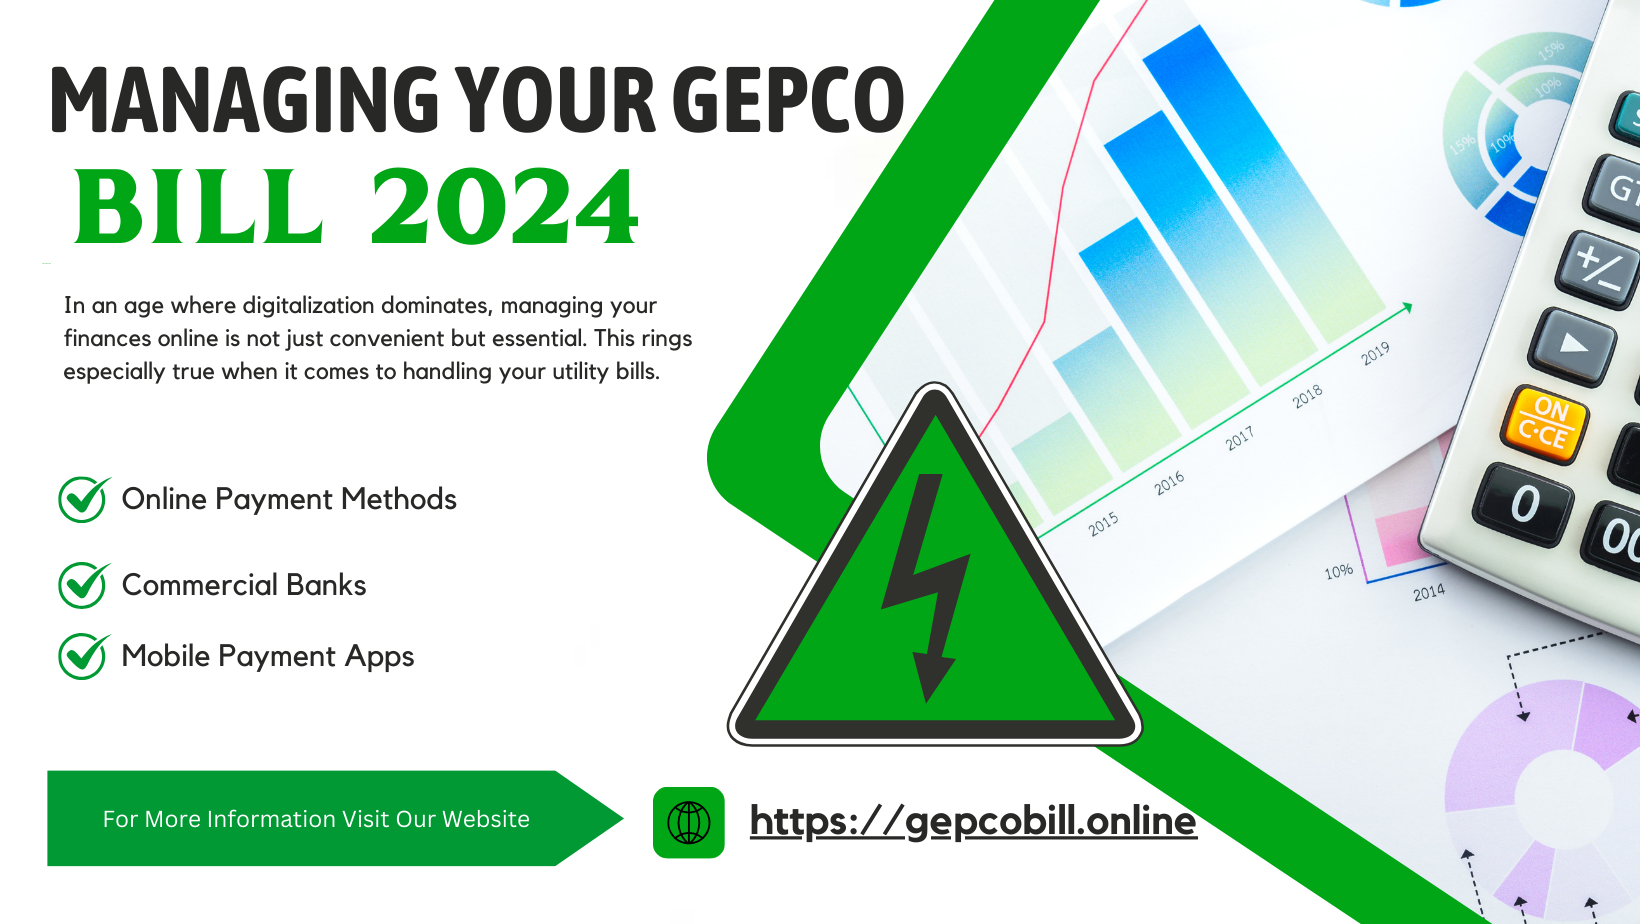 Managing Your Gepco Bill